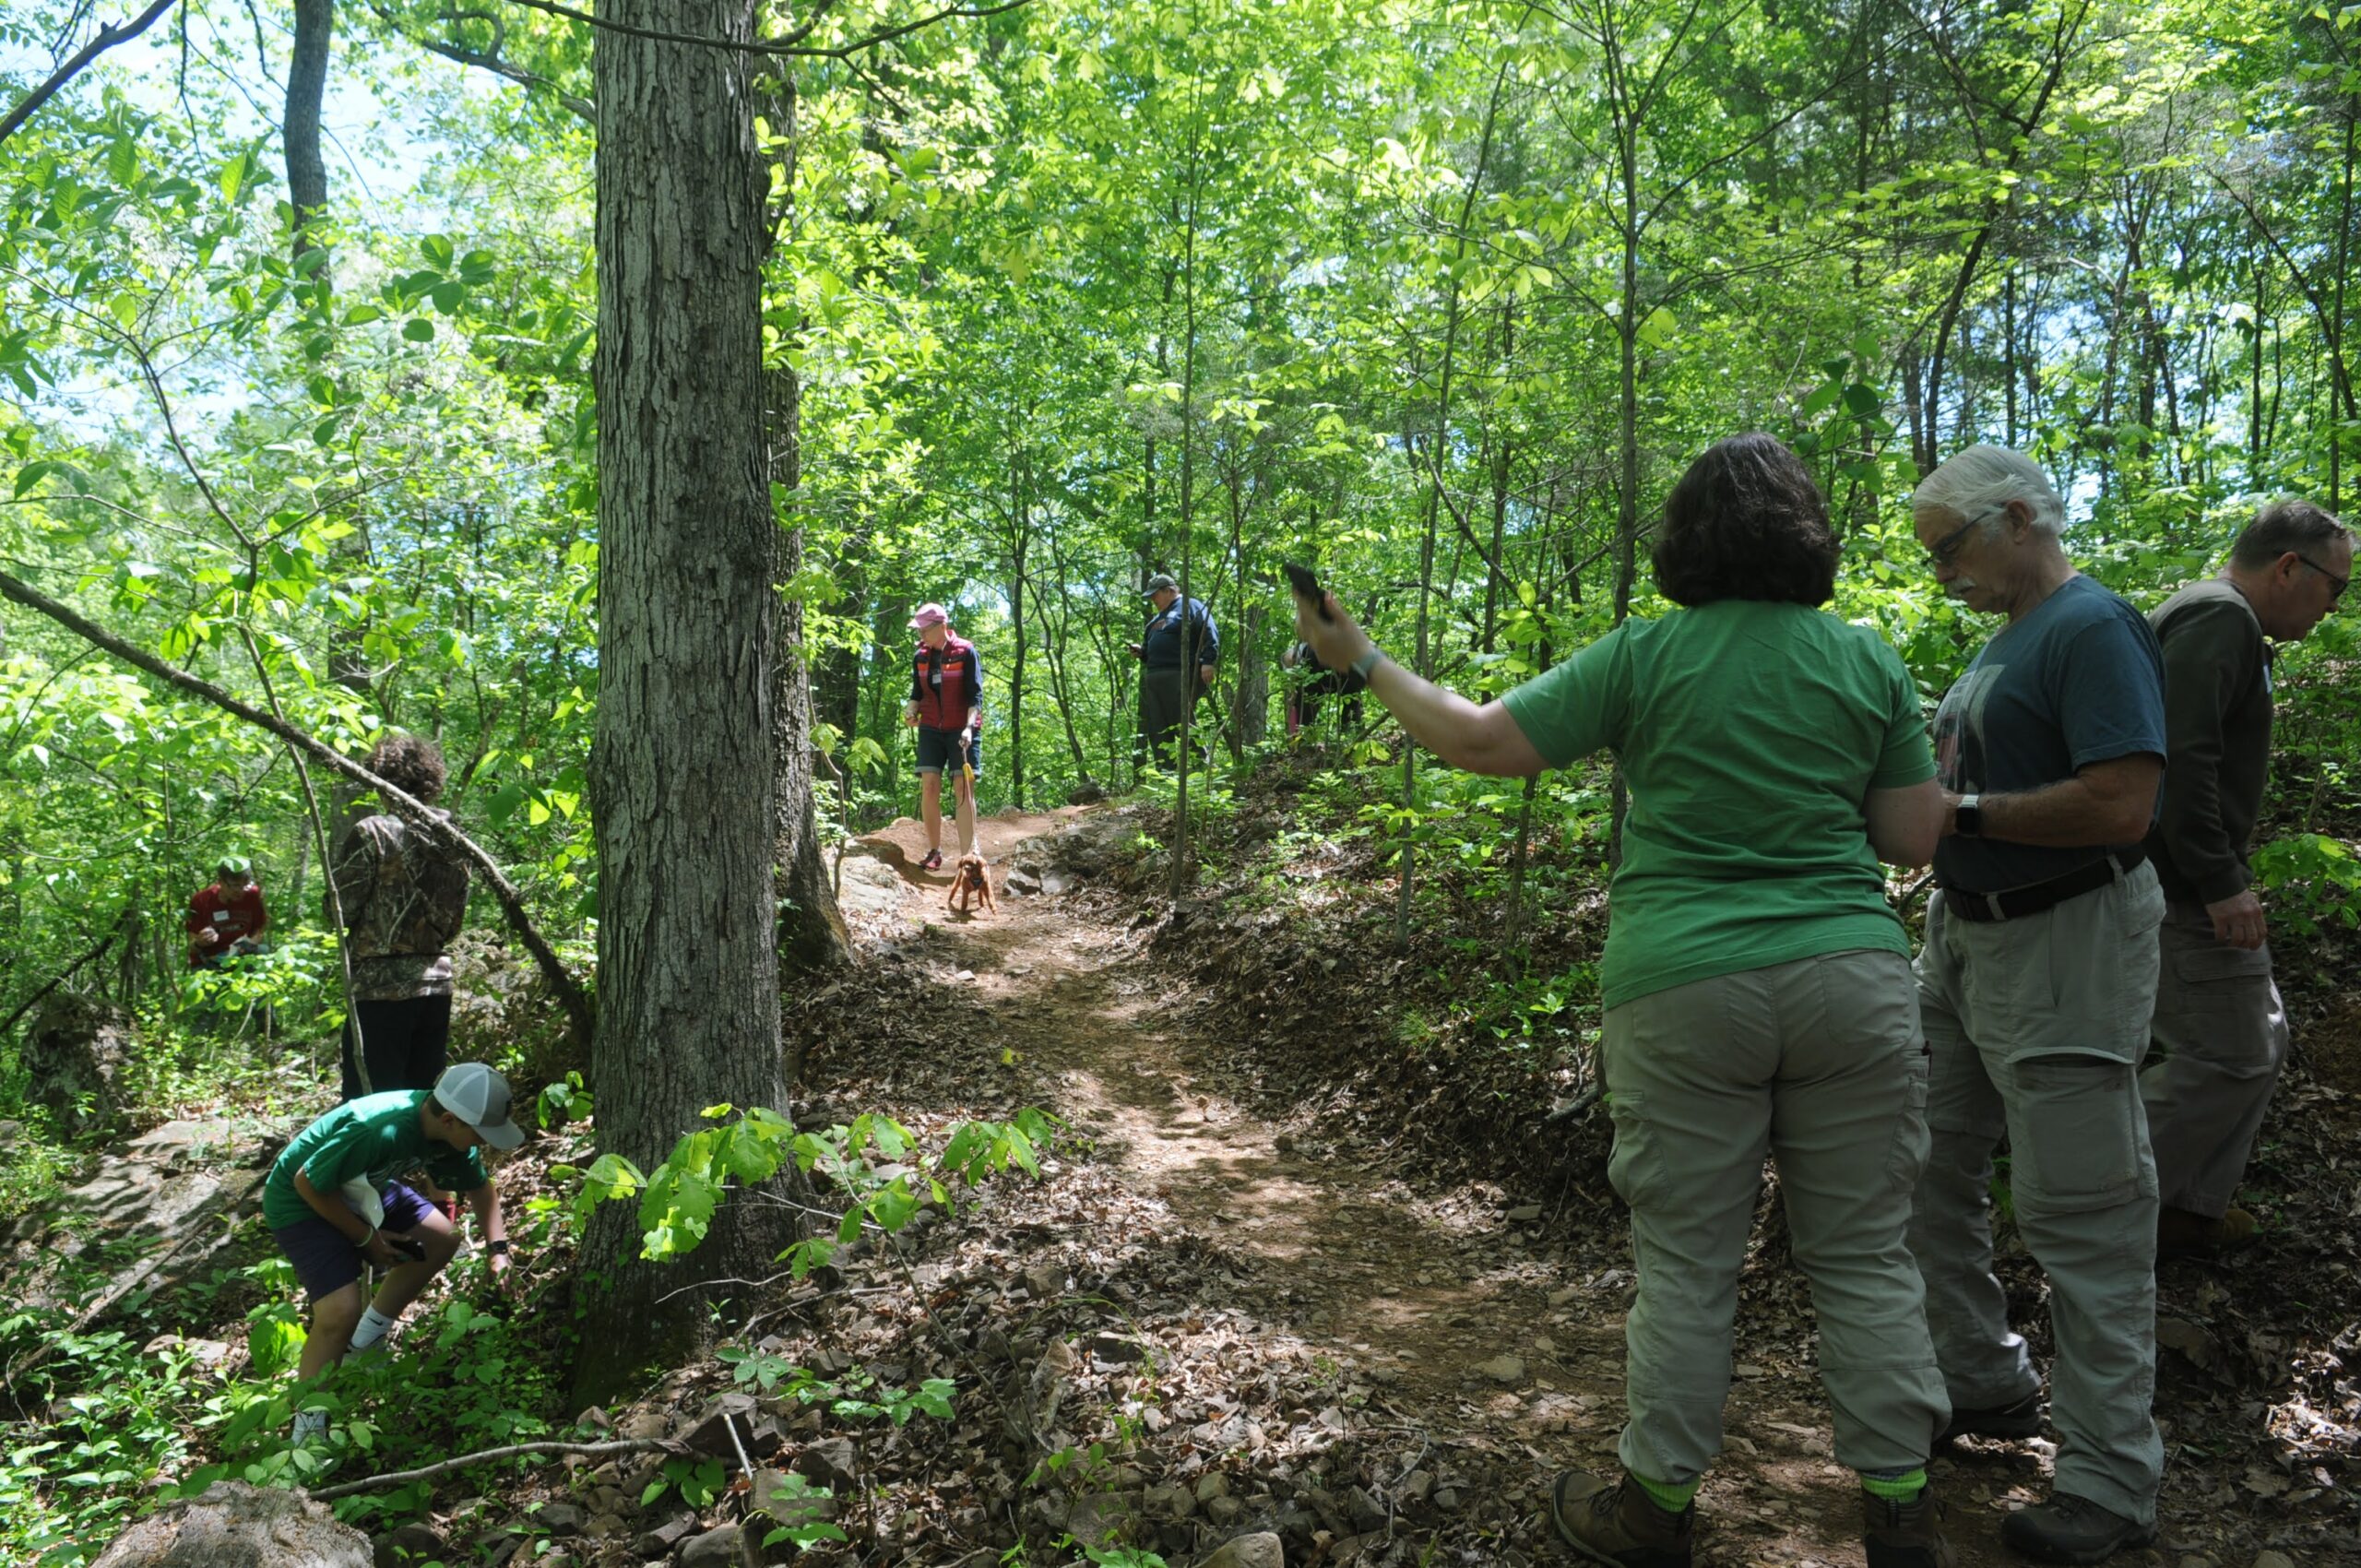 Geocachers from the event are on the trail looking for caches.